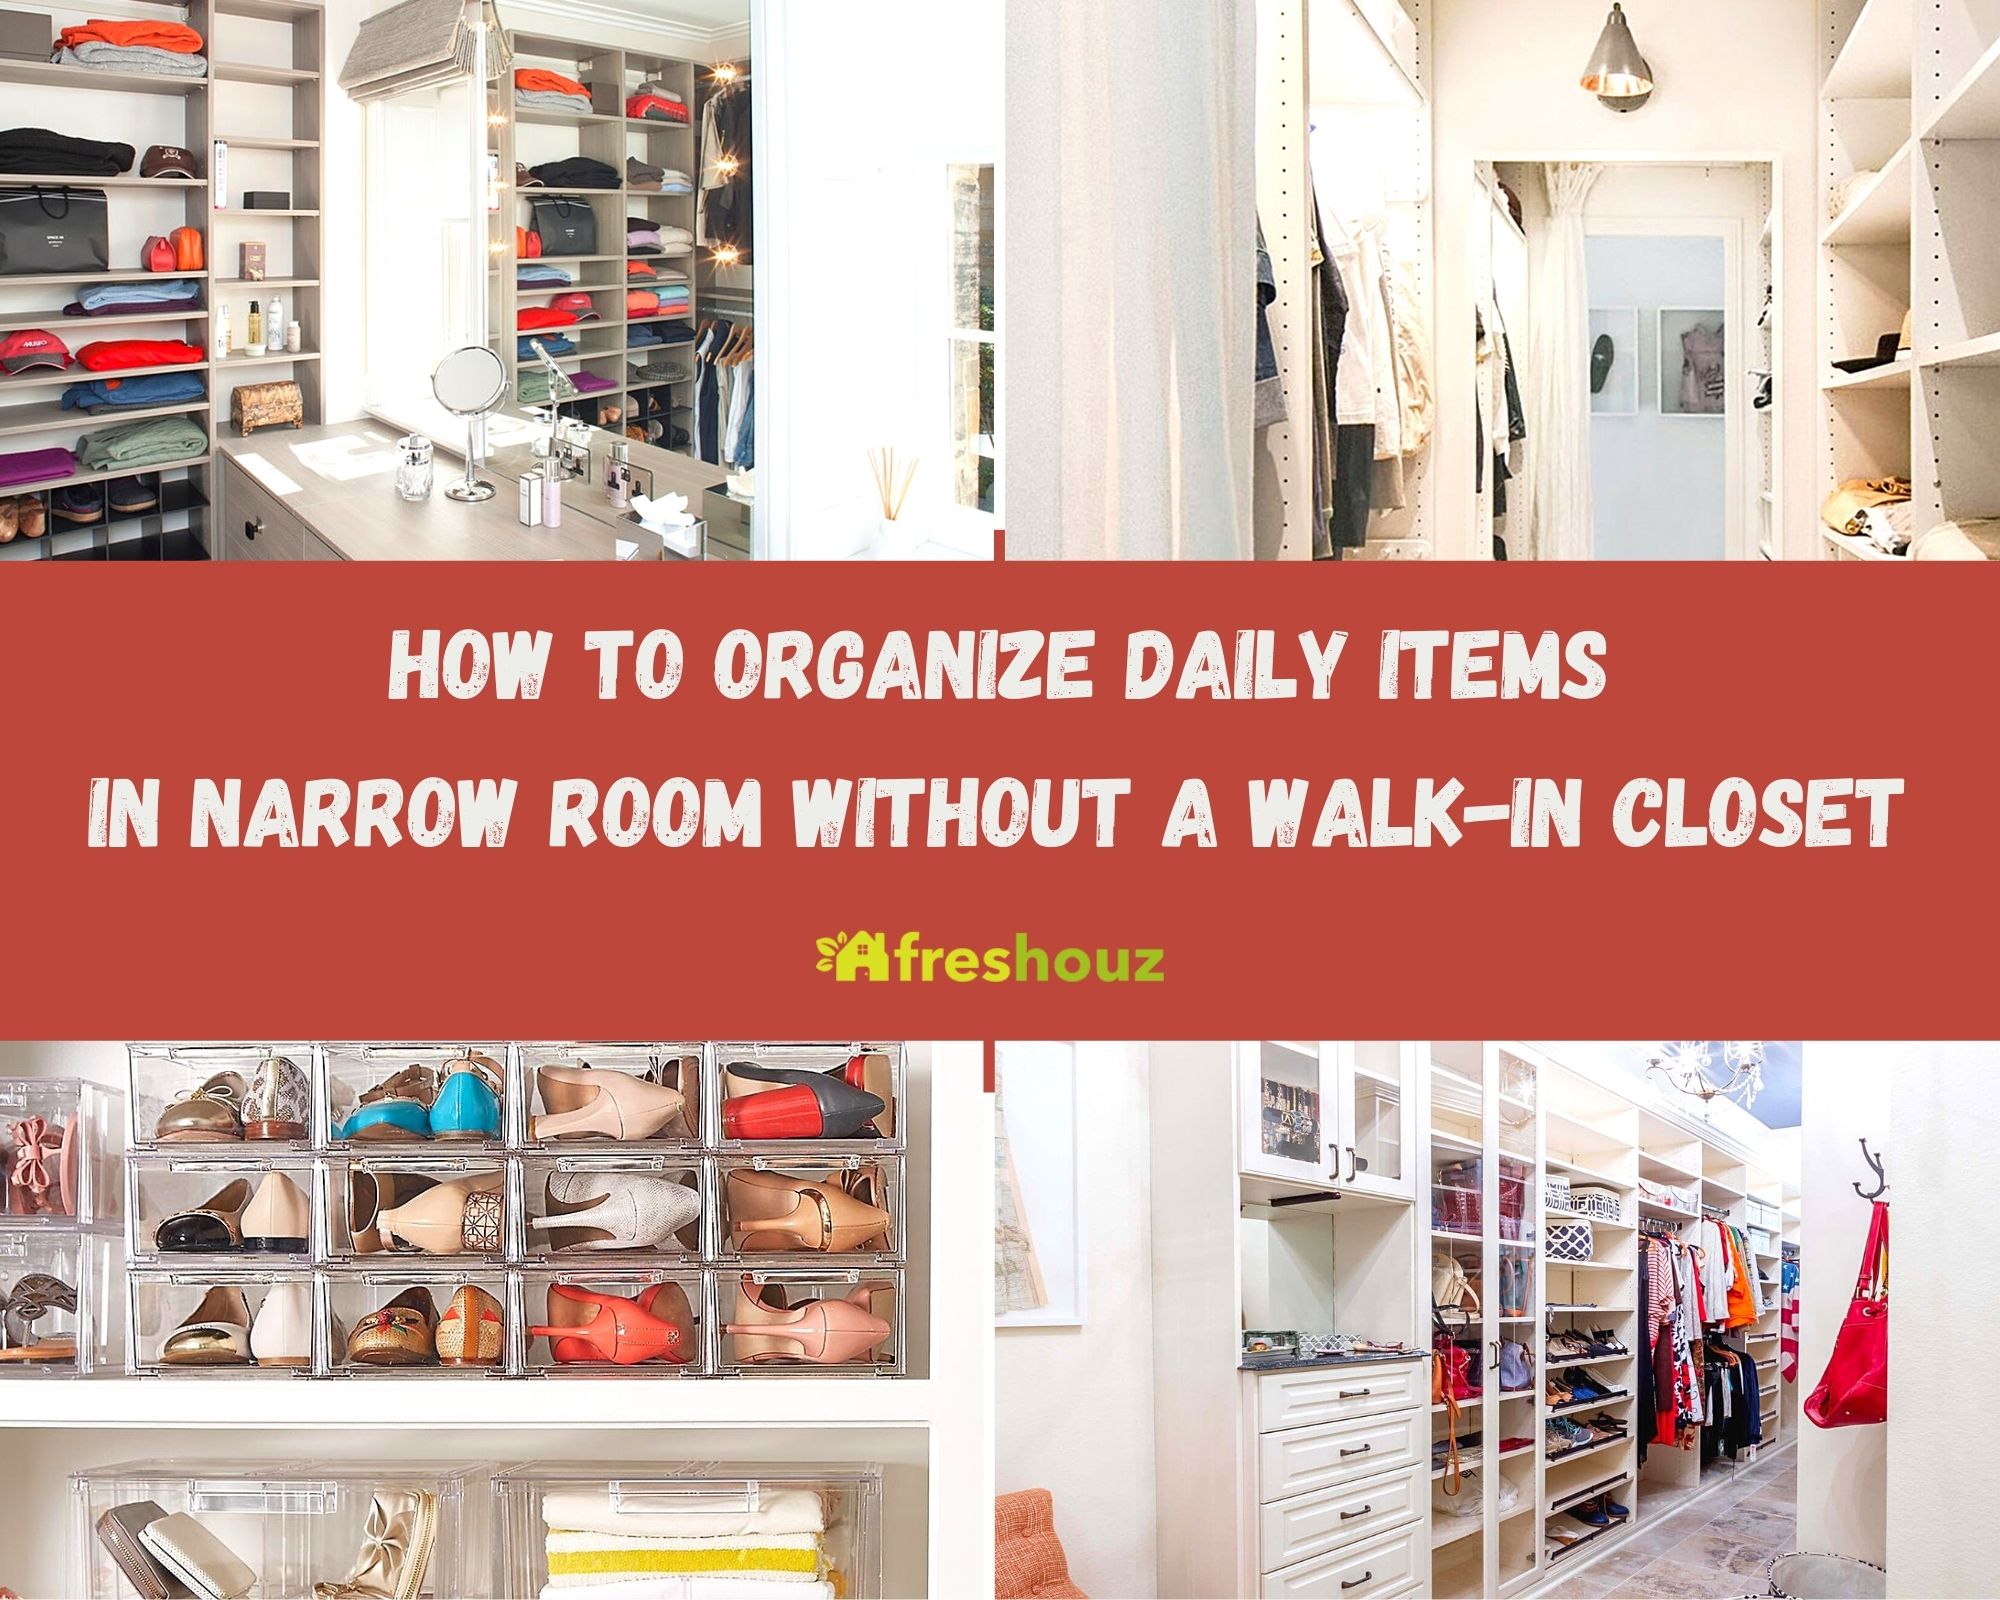 How To Organize Daily Items In Narrow Room Without A Walk In Closet